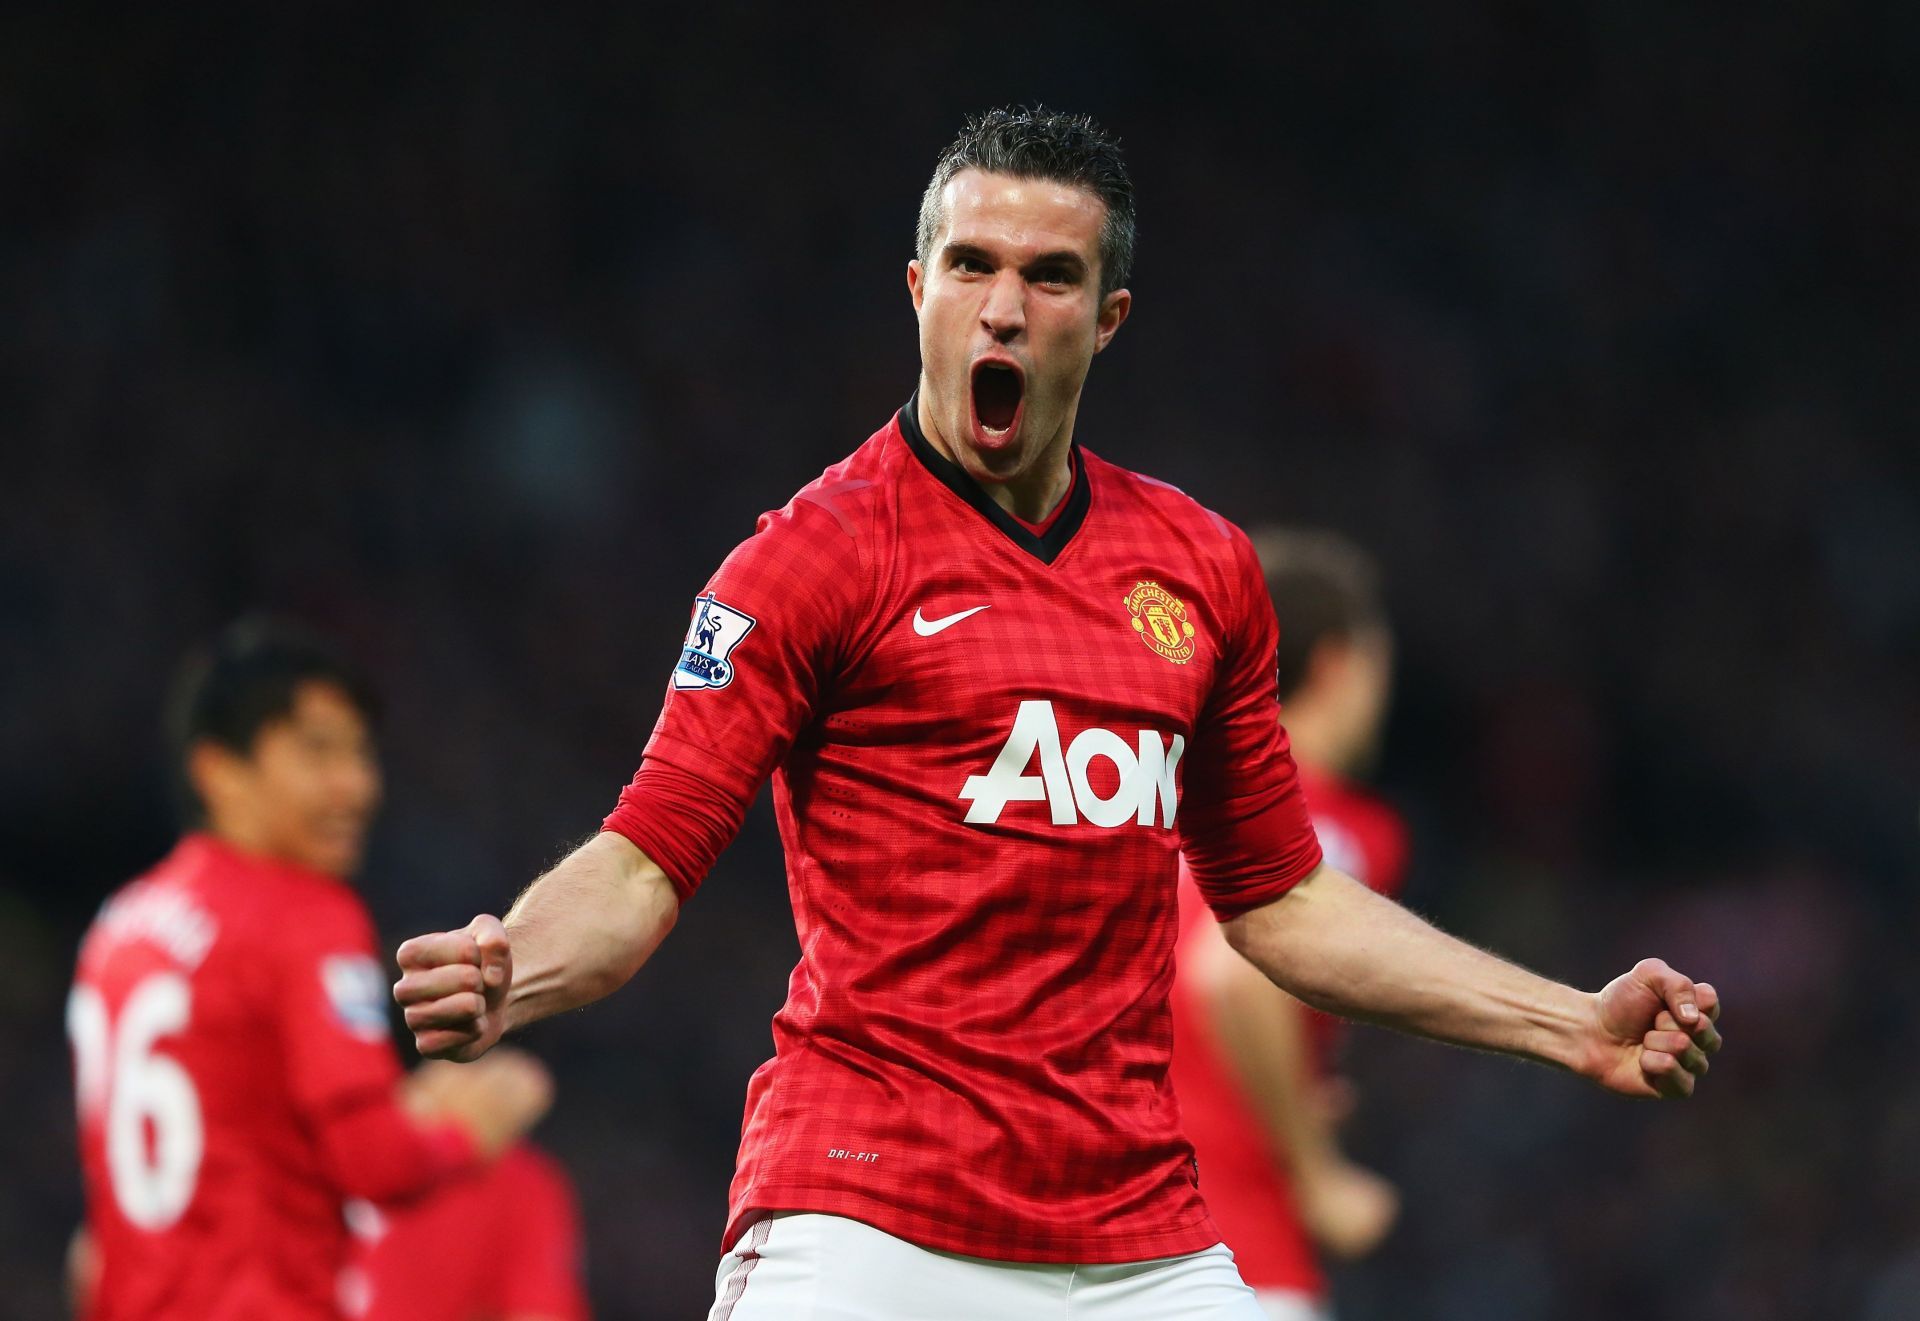 Robin van Persie entertained millions with his sublime goals